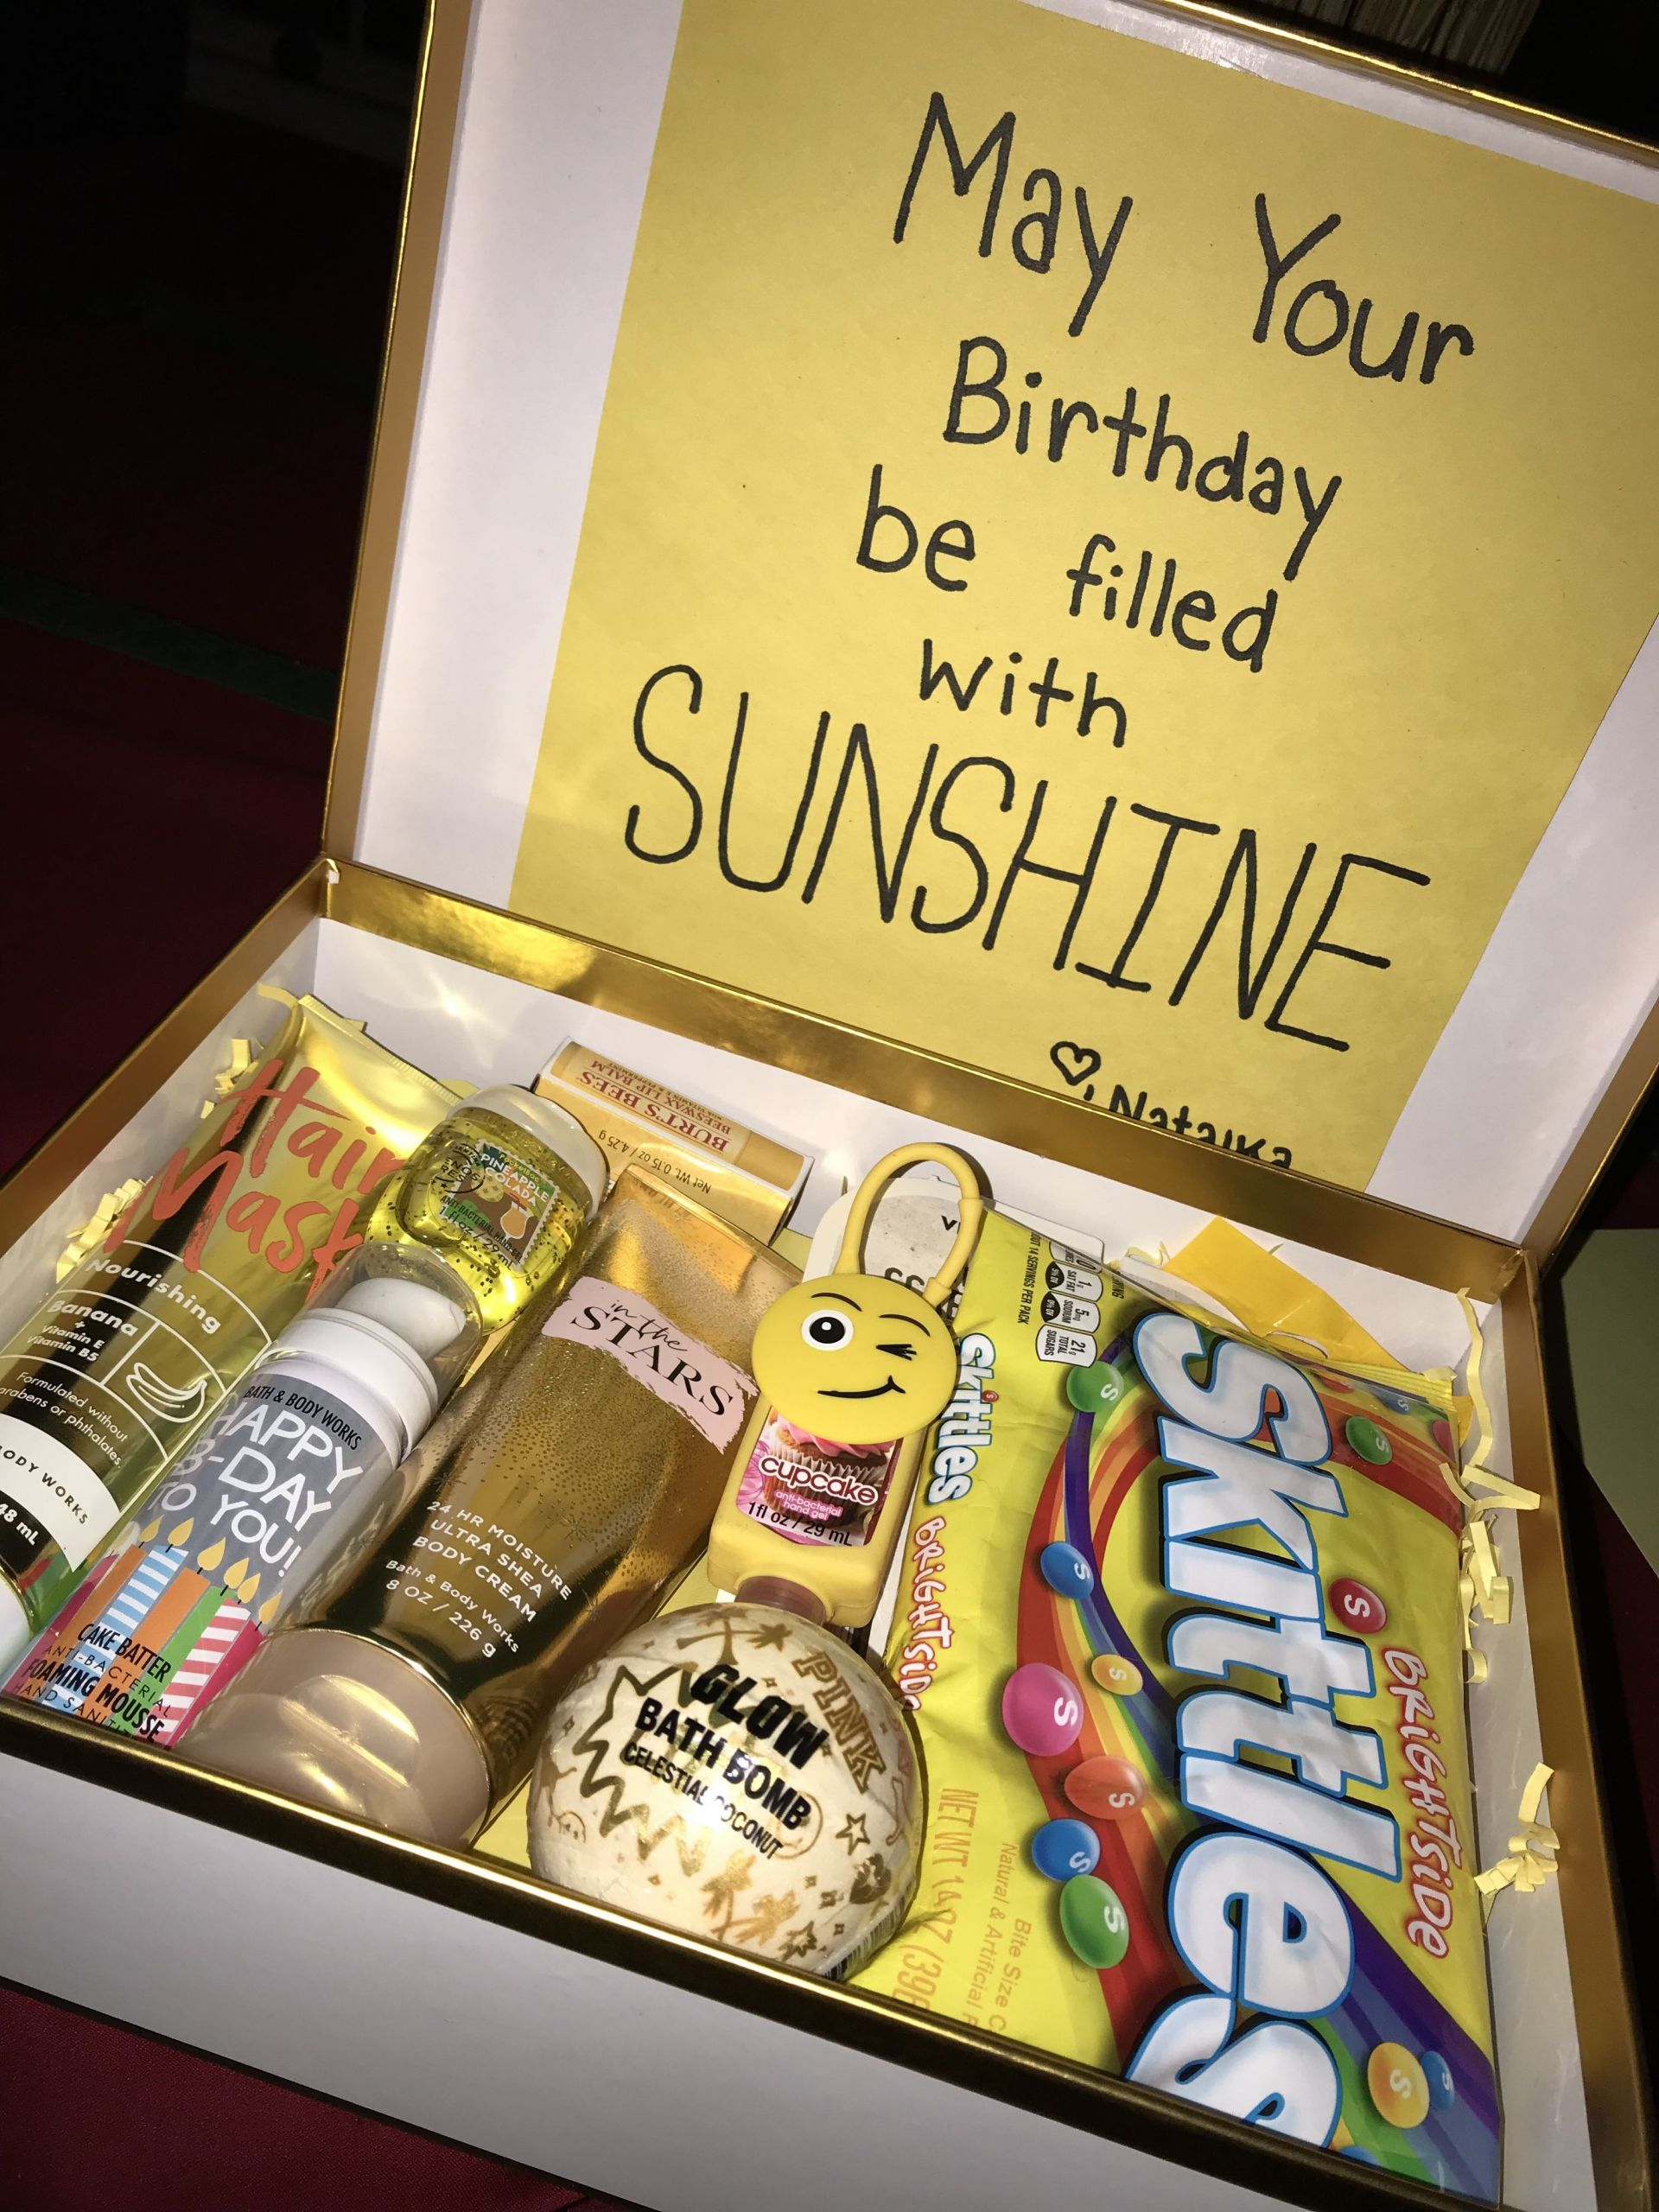 Last Minute Birthday Gift Ideas For Girlfriend
 This is a cute birthday present idea for friends